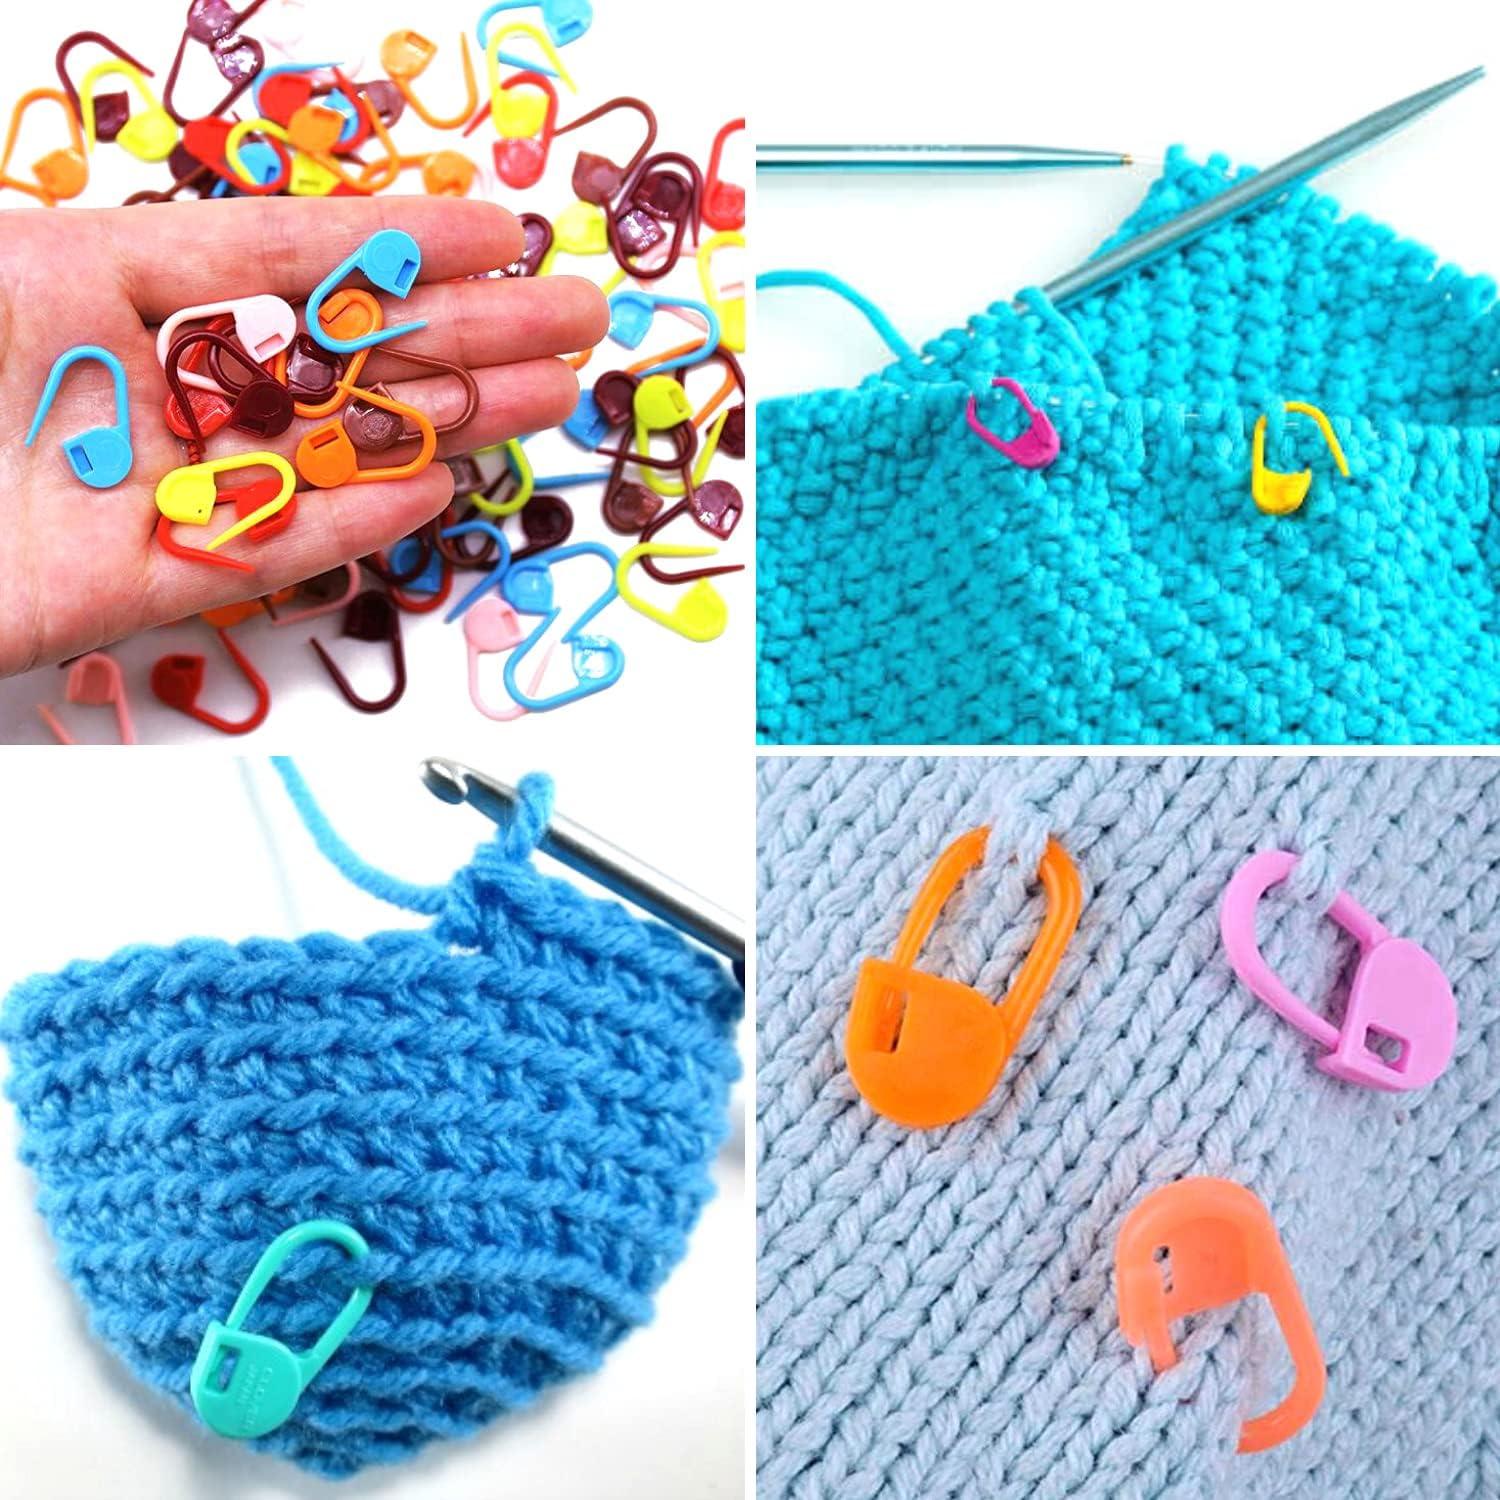 Stitch Markers for Crocheting - 50Pcs Crochet Stitch Markers for Knitting  Yarn & DIY Crafts, Lightweight Plastic Crochet Pins with 8 Assorted Colors